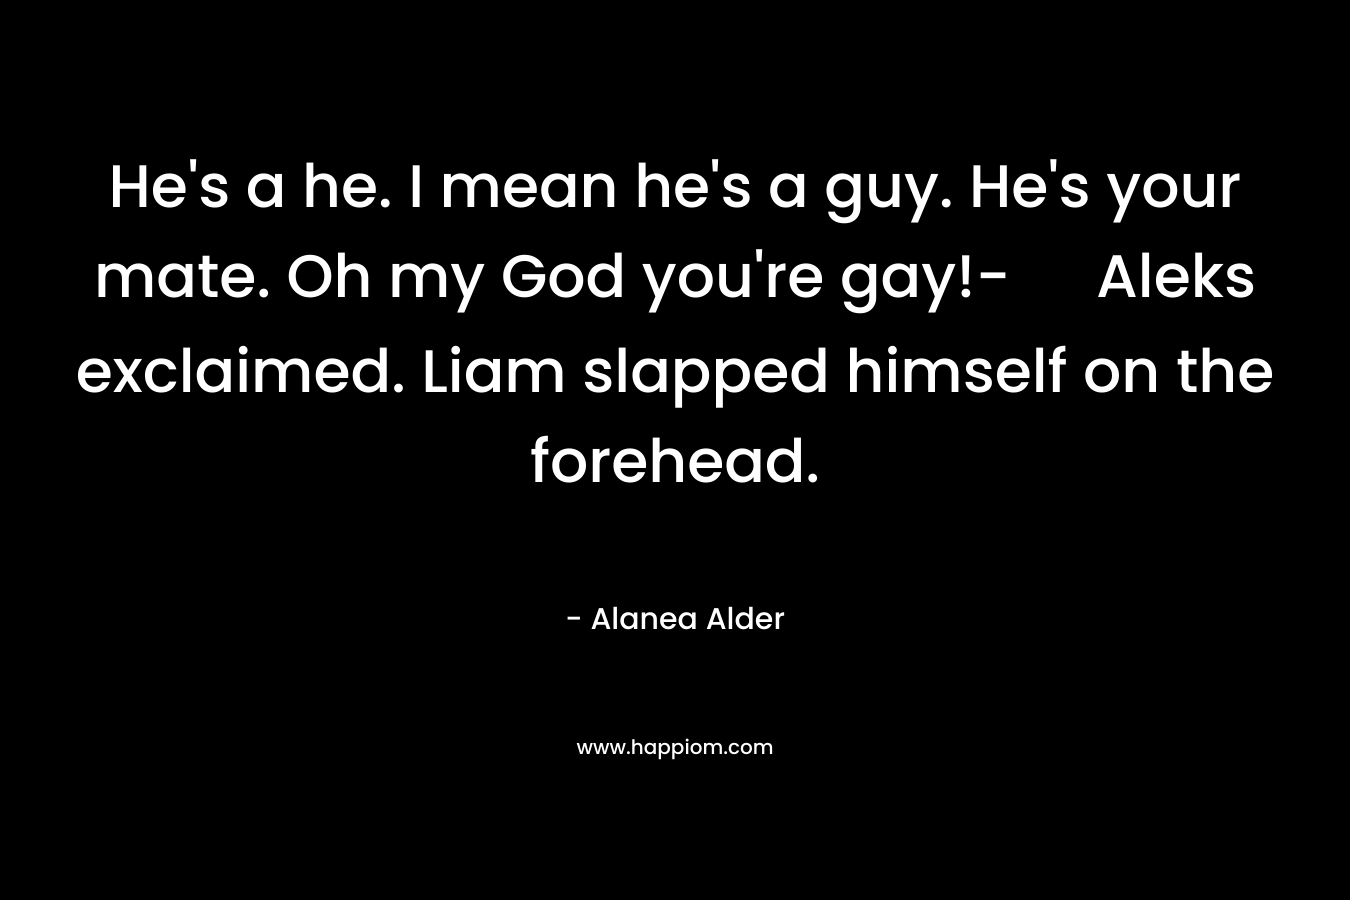 He’s a he. I mean he’s a guy. He’s your mate. Oh my God you’re gay!- Aleks exclaimed. Liam slapped himself on the forehead. – Alanea Alder